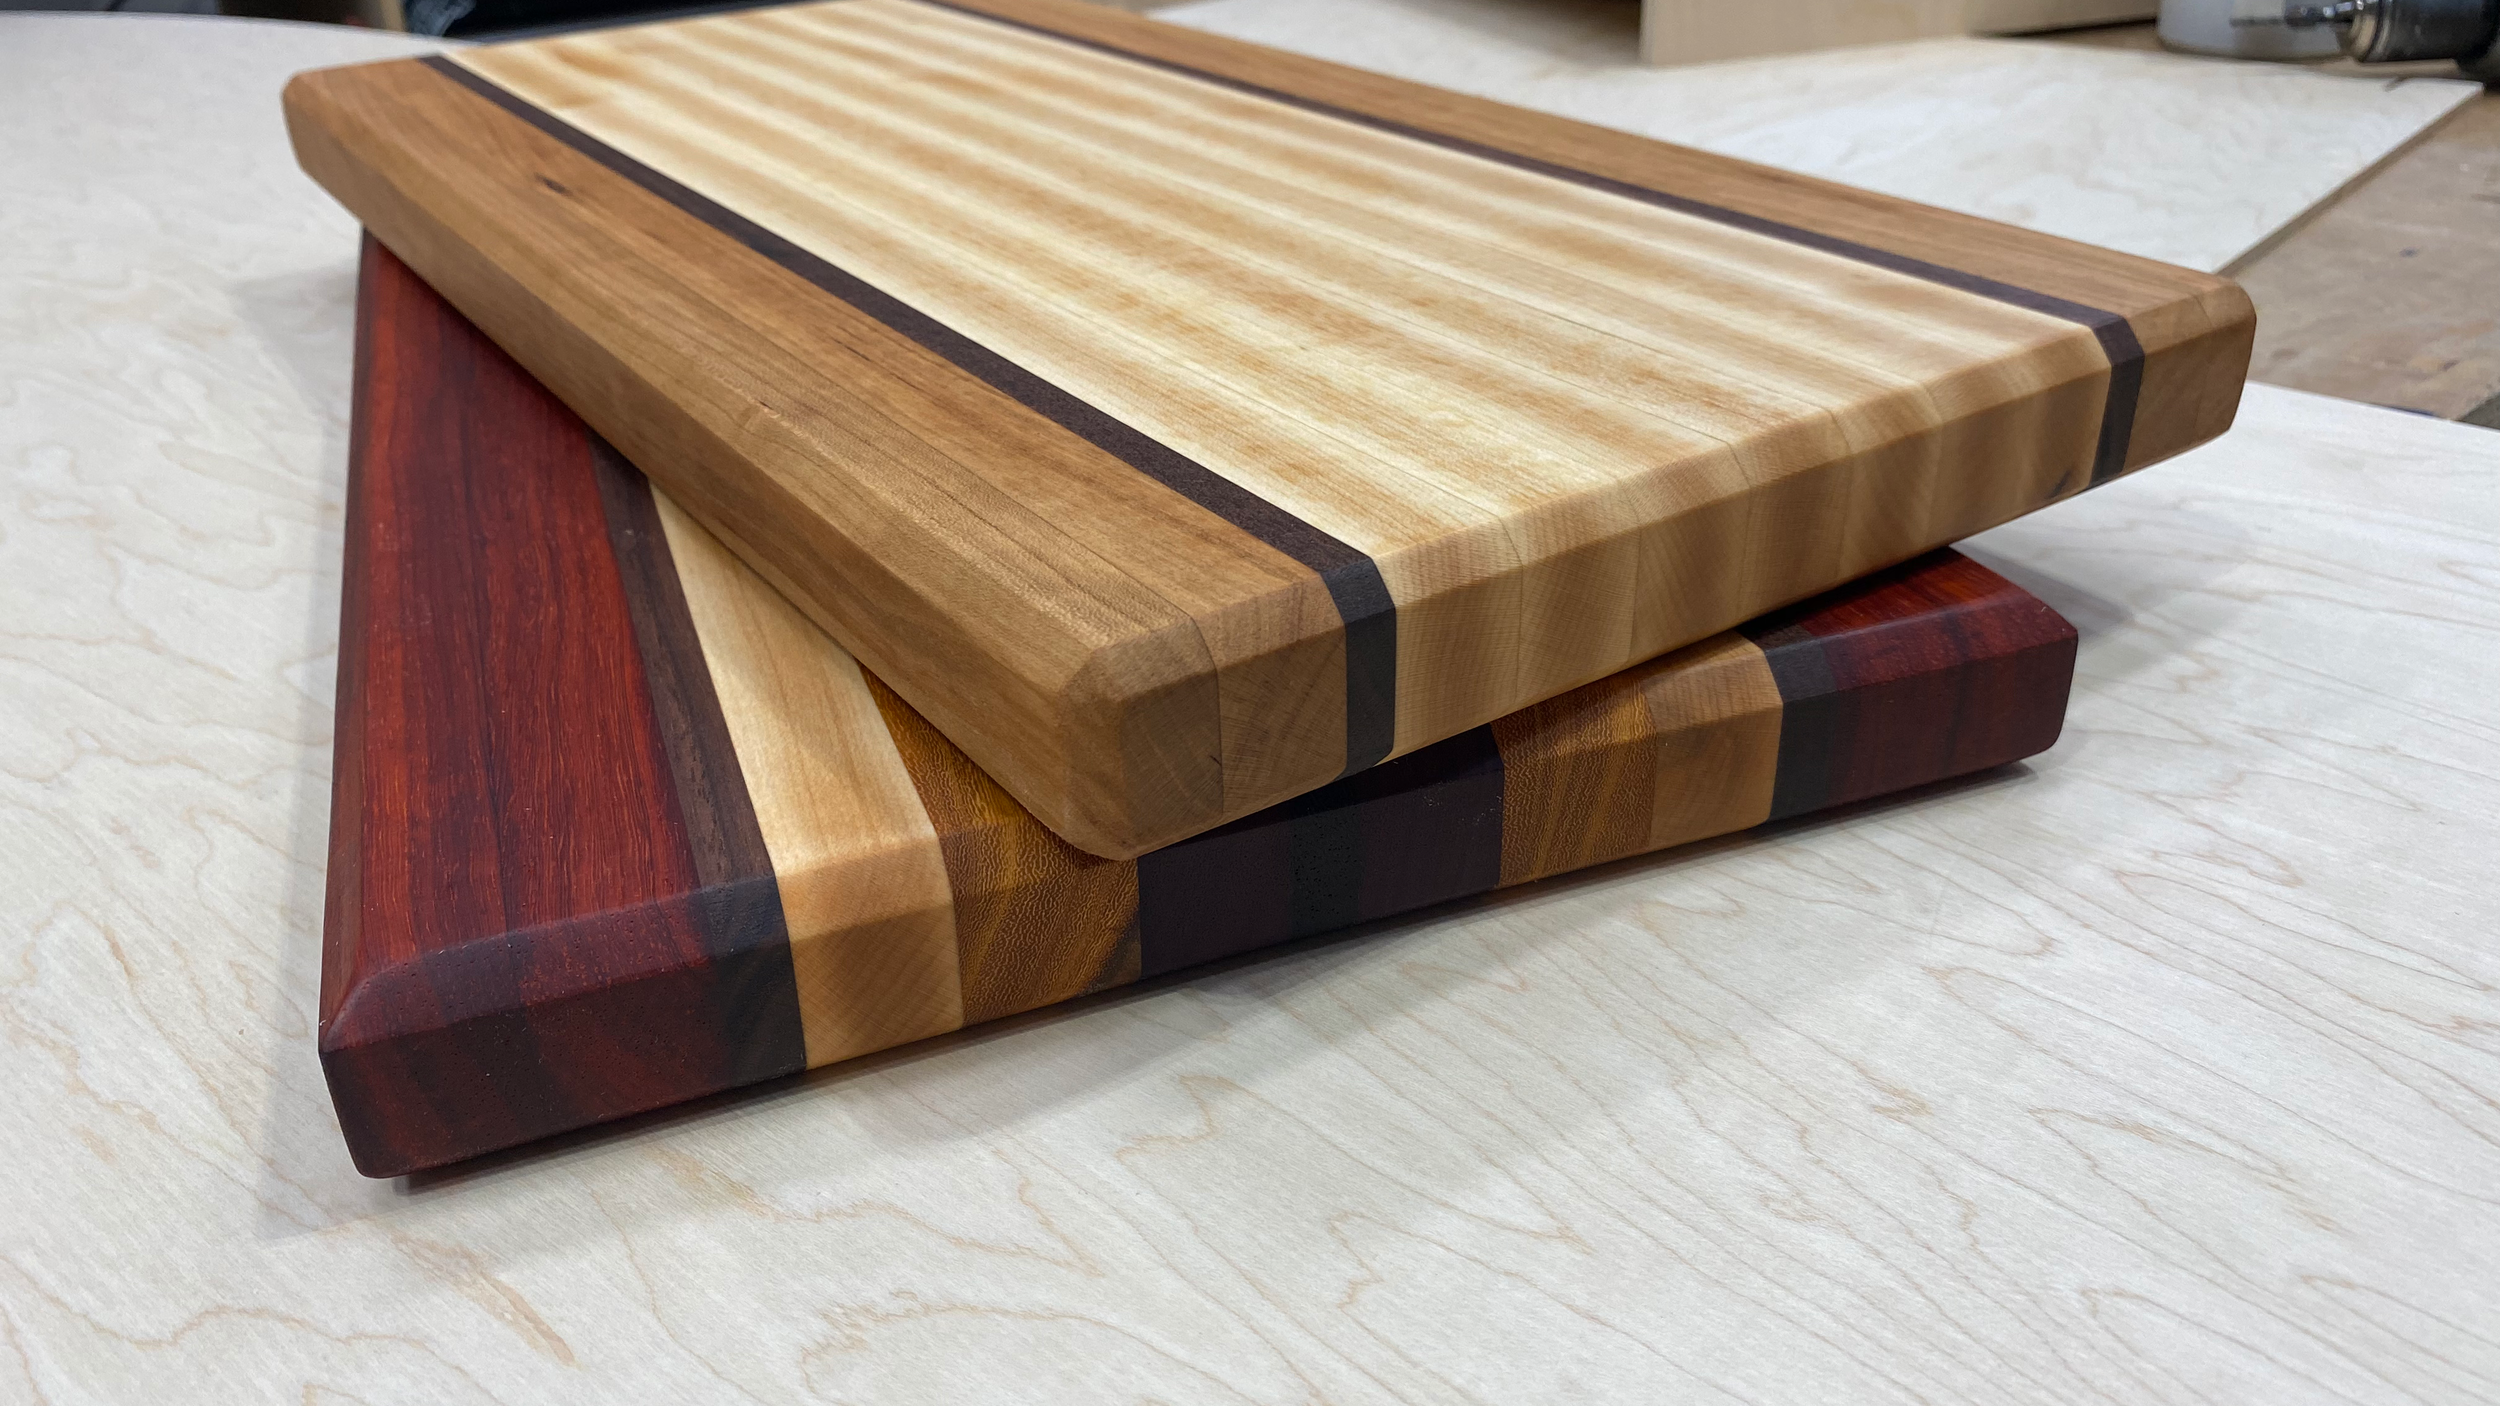 How to Make a Cutting Board from Any Wood